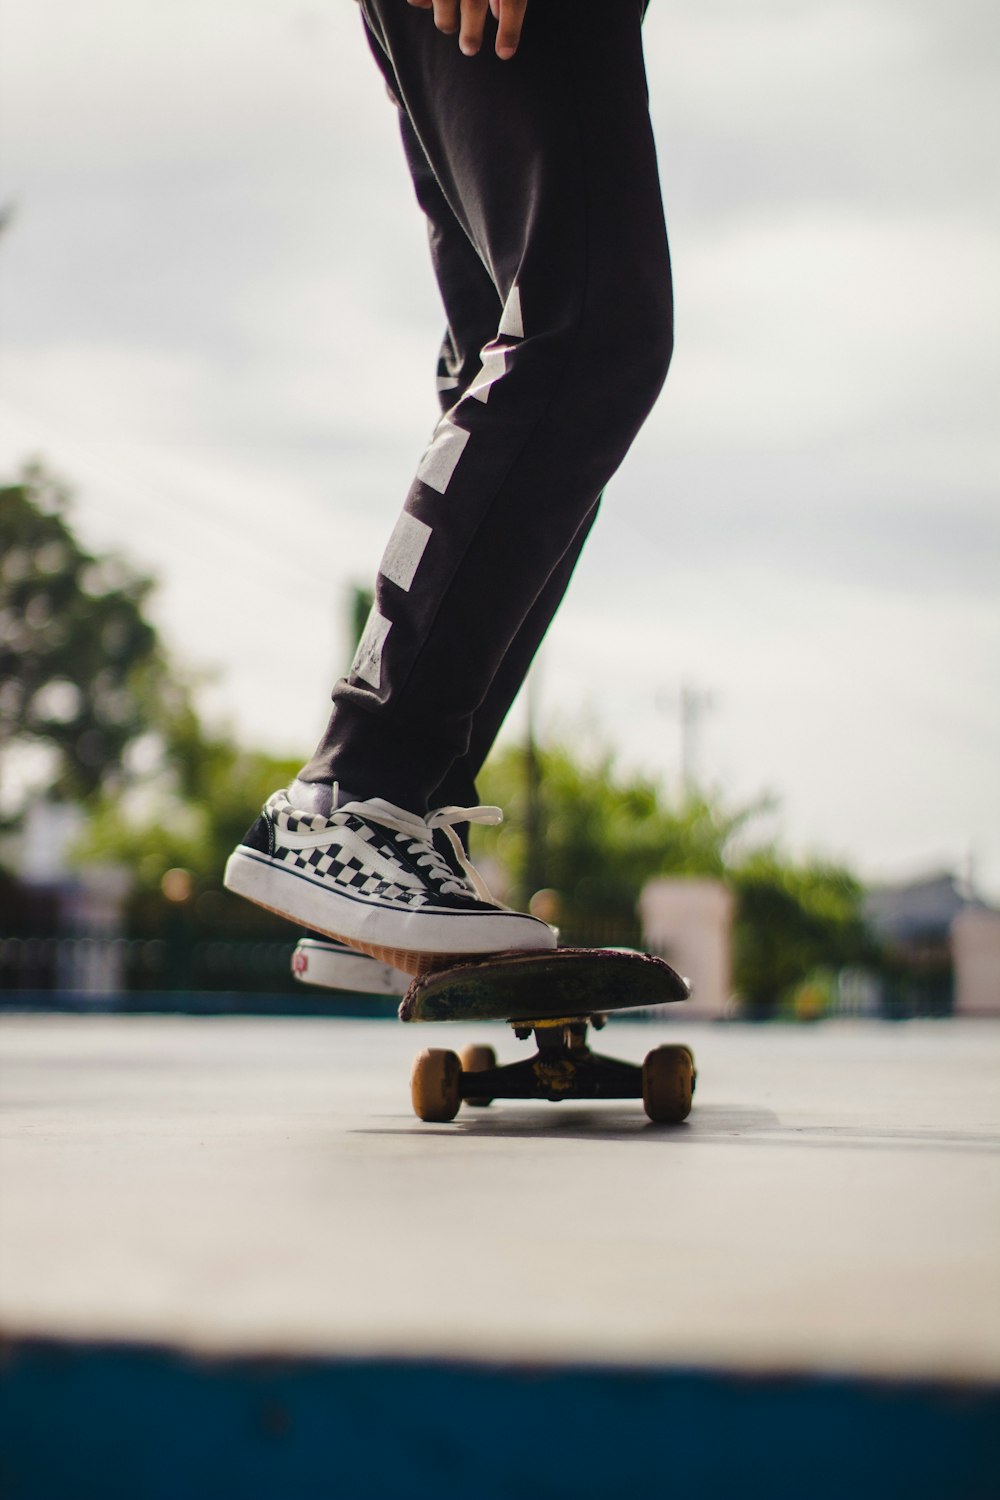 person in black and white adidas sneakers riding skateboard during daytime  photo – Free Skateboard Image on Unsplash